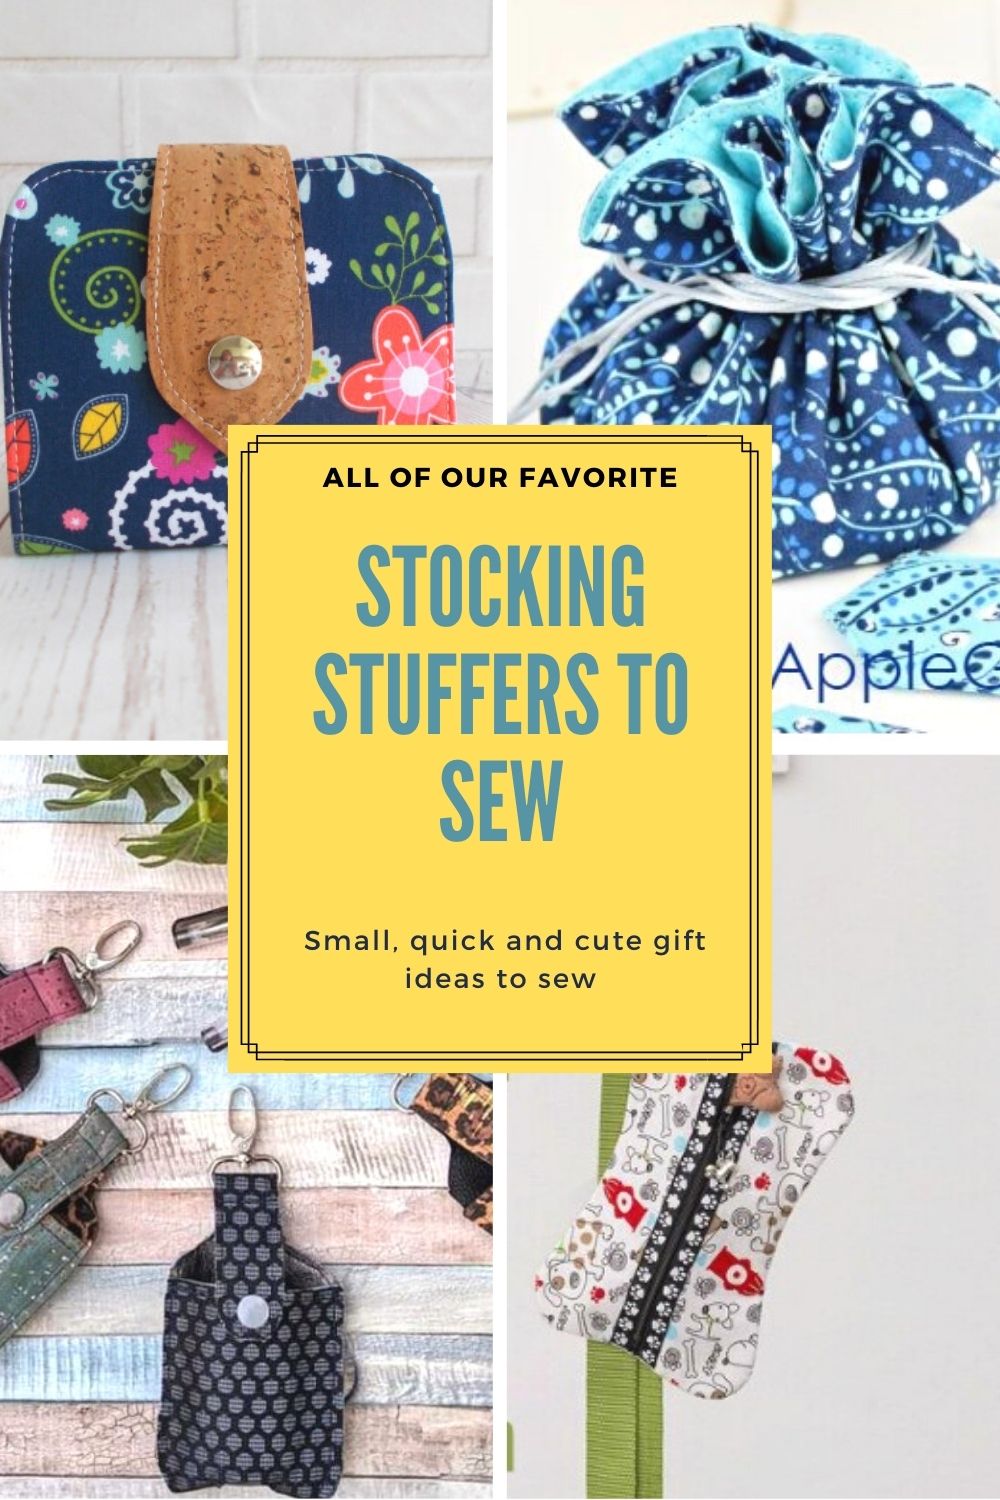 10 Gifts to Sew for Book Lovers - Sewing With Scraps